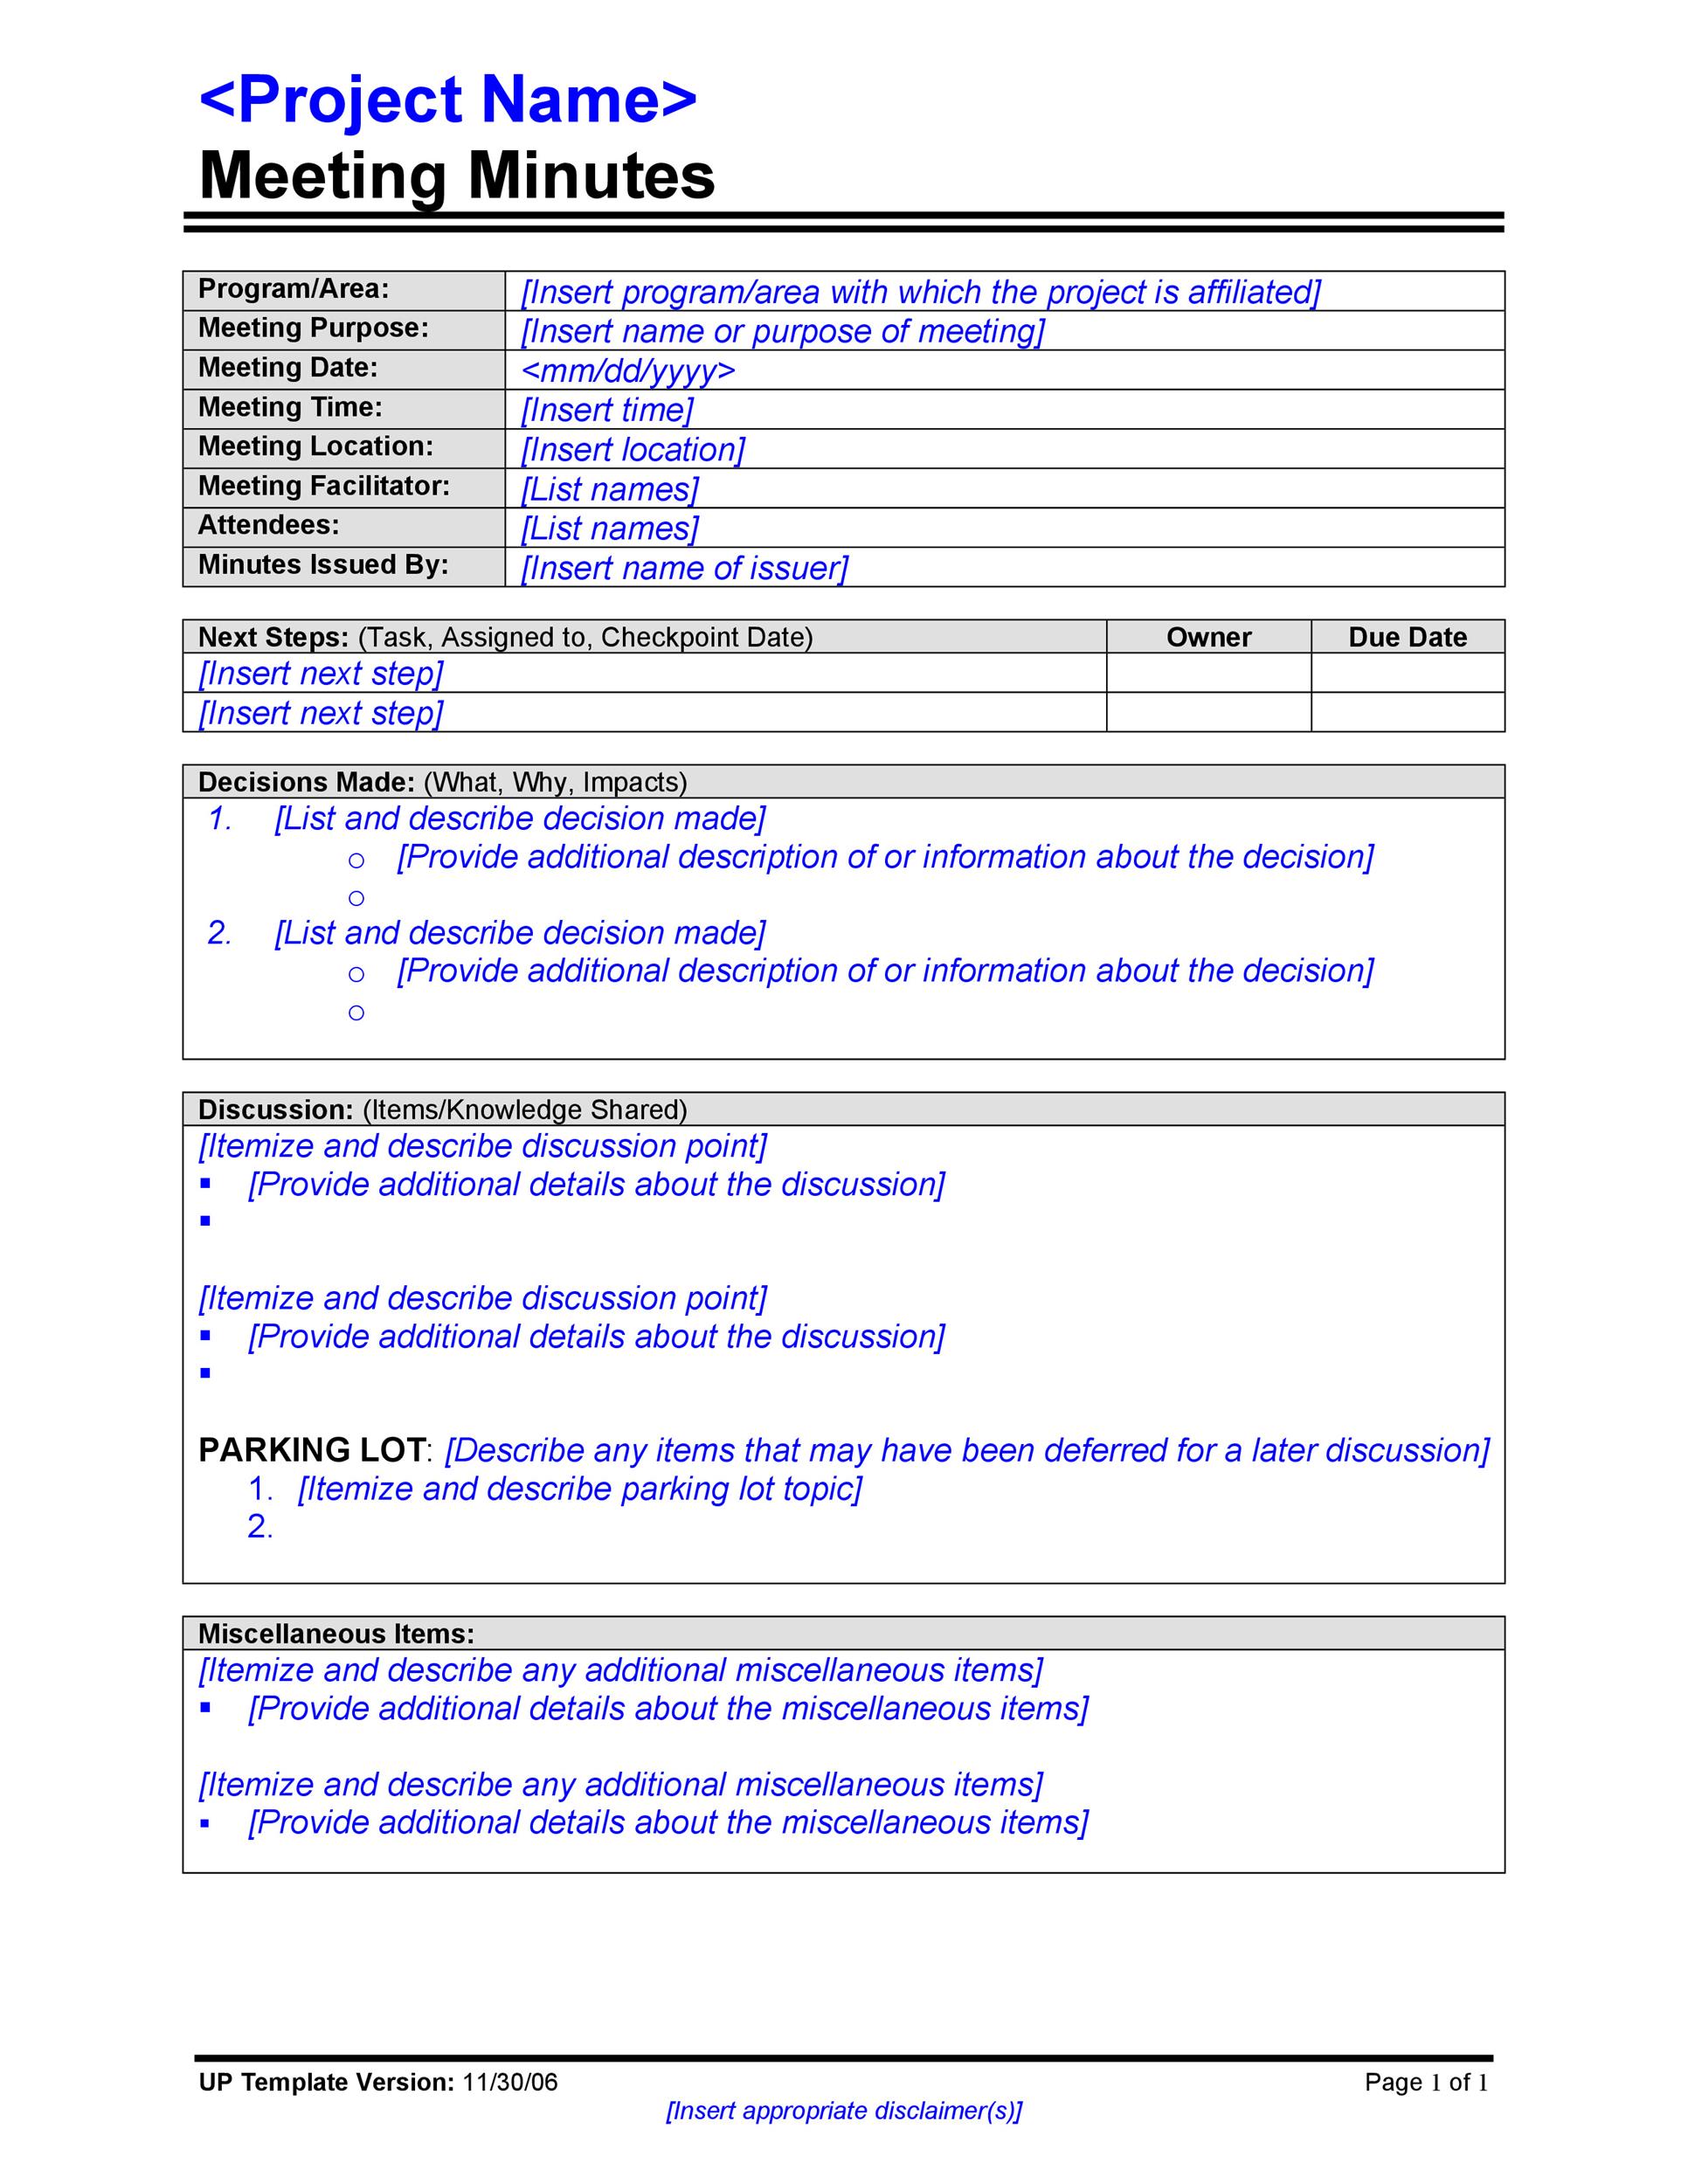 Robert Rules Of Order Minutes Template from templatelab.com